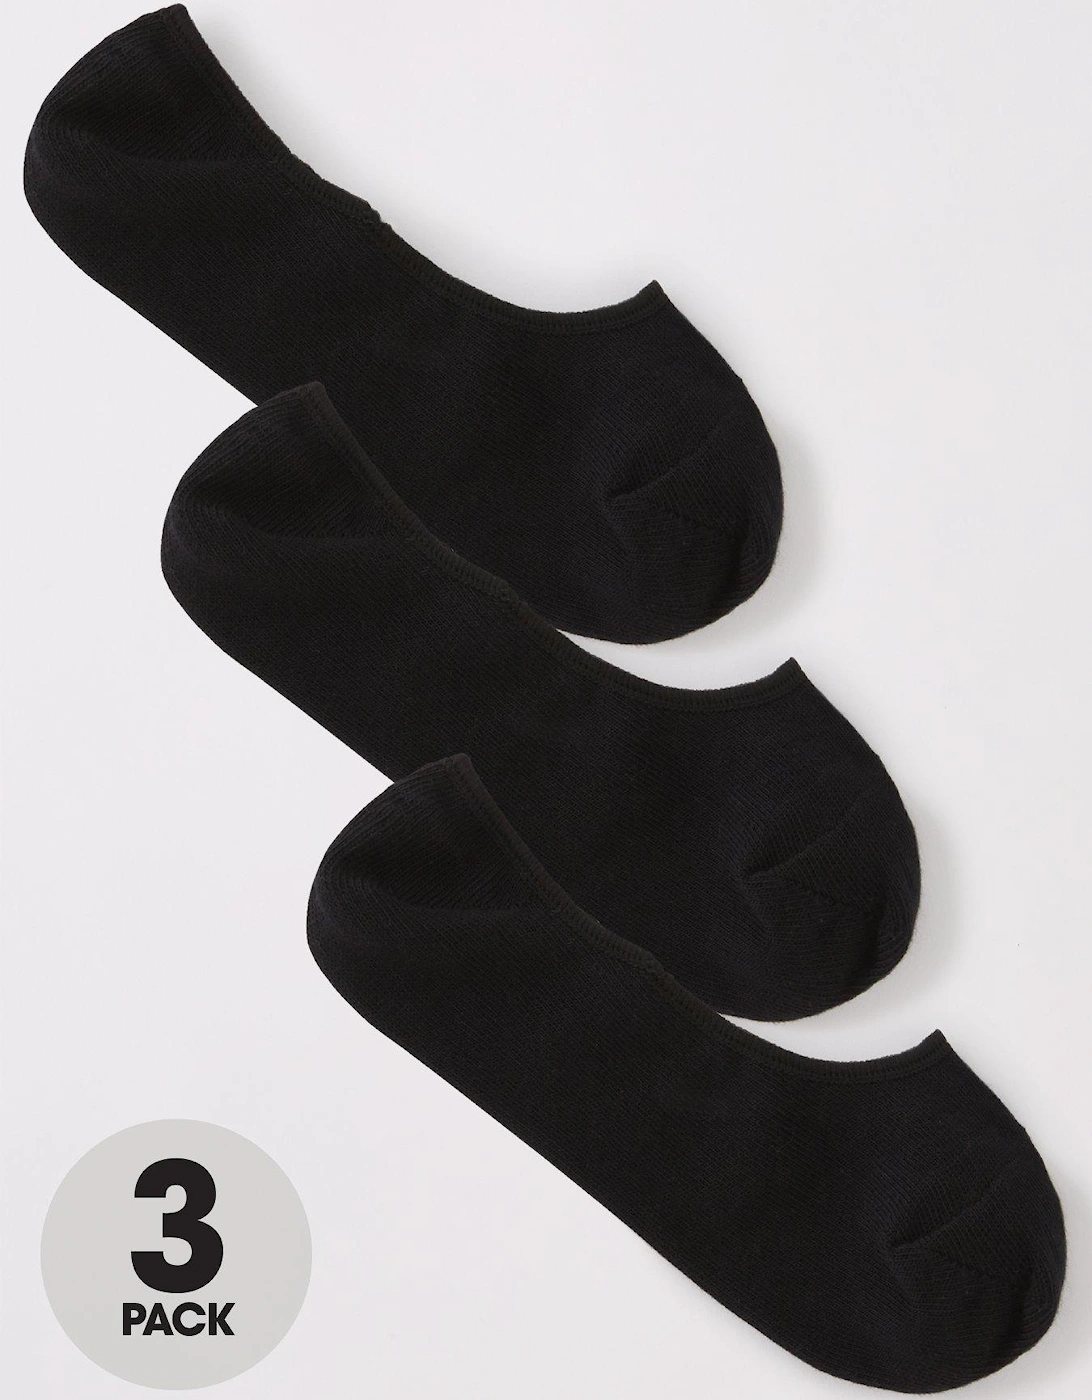 3 Pack of Invisible Trainer Liner Socks With Heel Grips - Black, 5 of 4